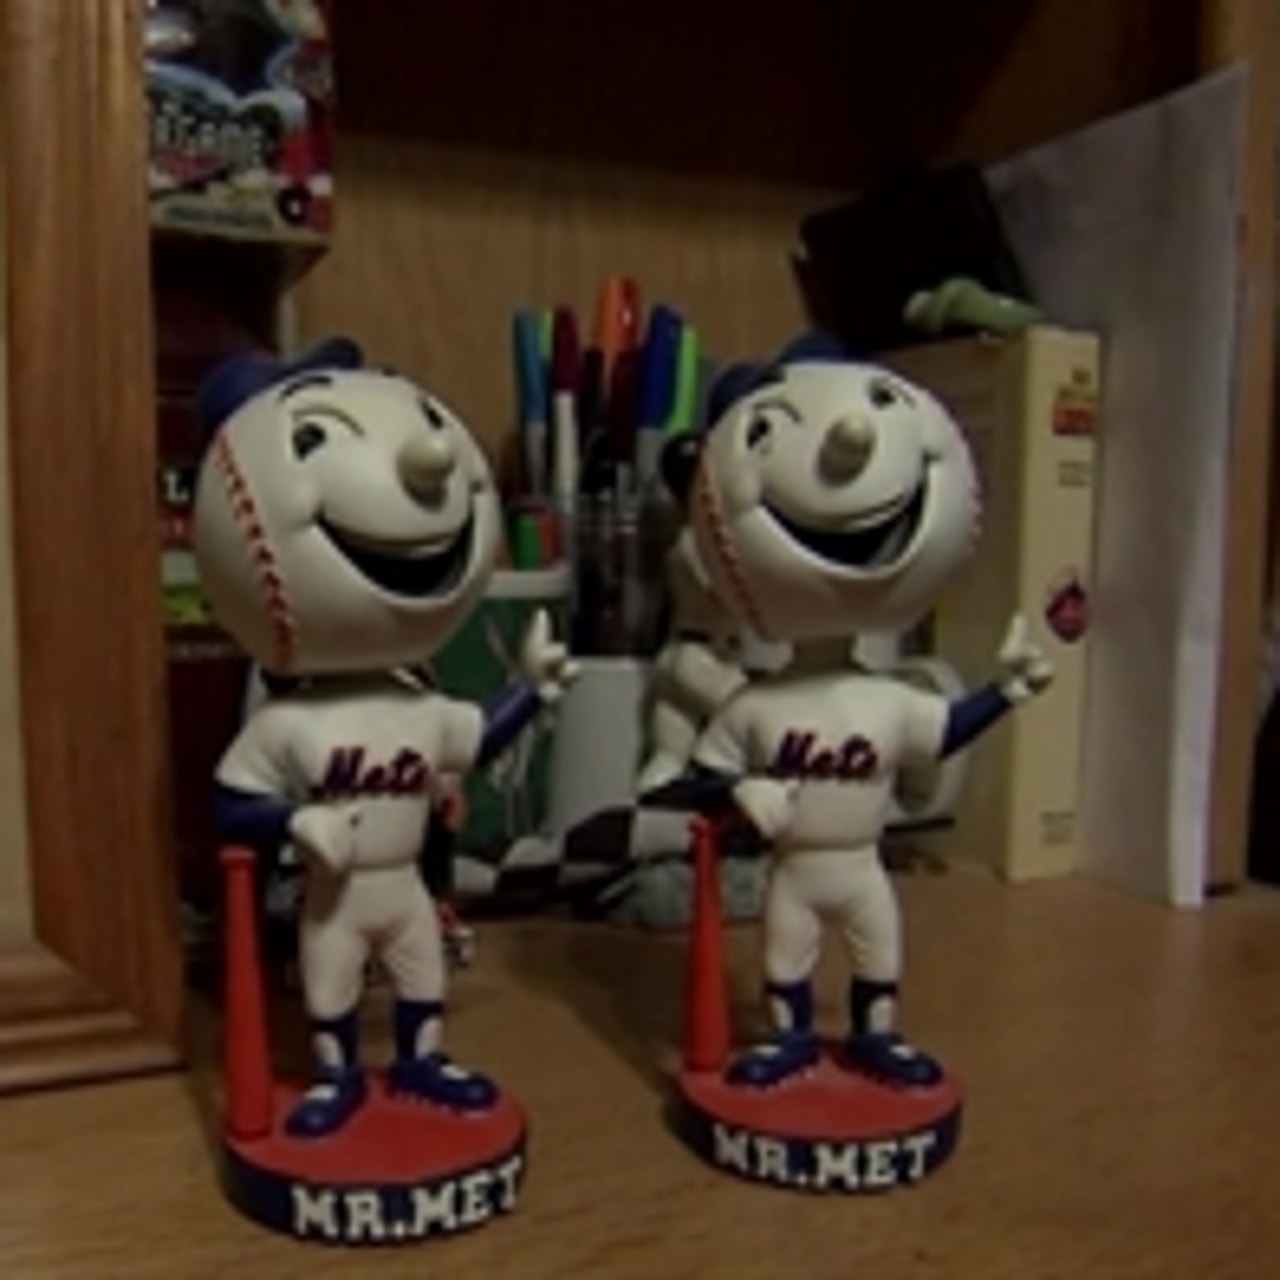 Todd's Garage: Mr. Met bobblehead finds a new home